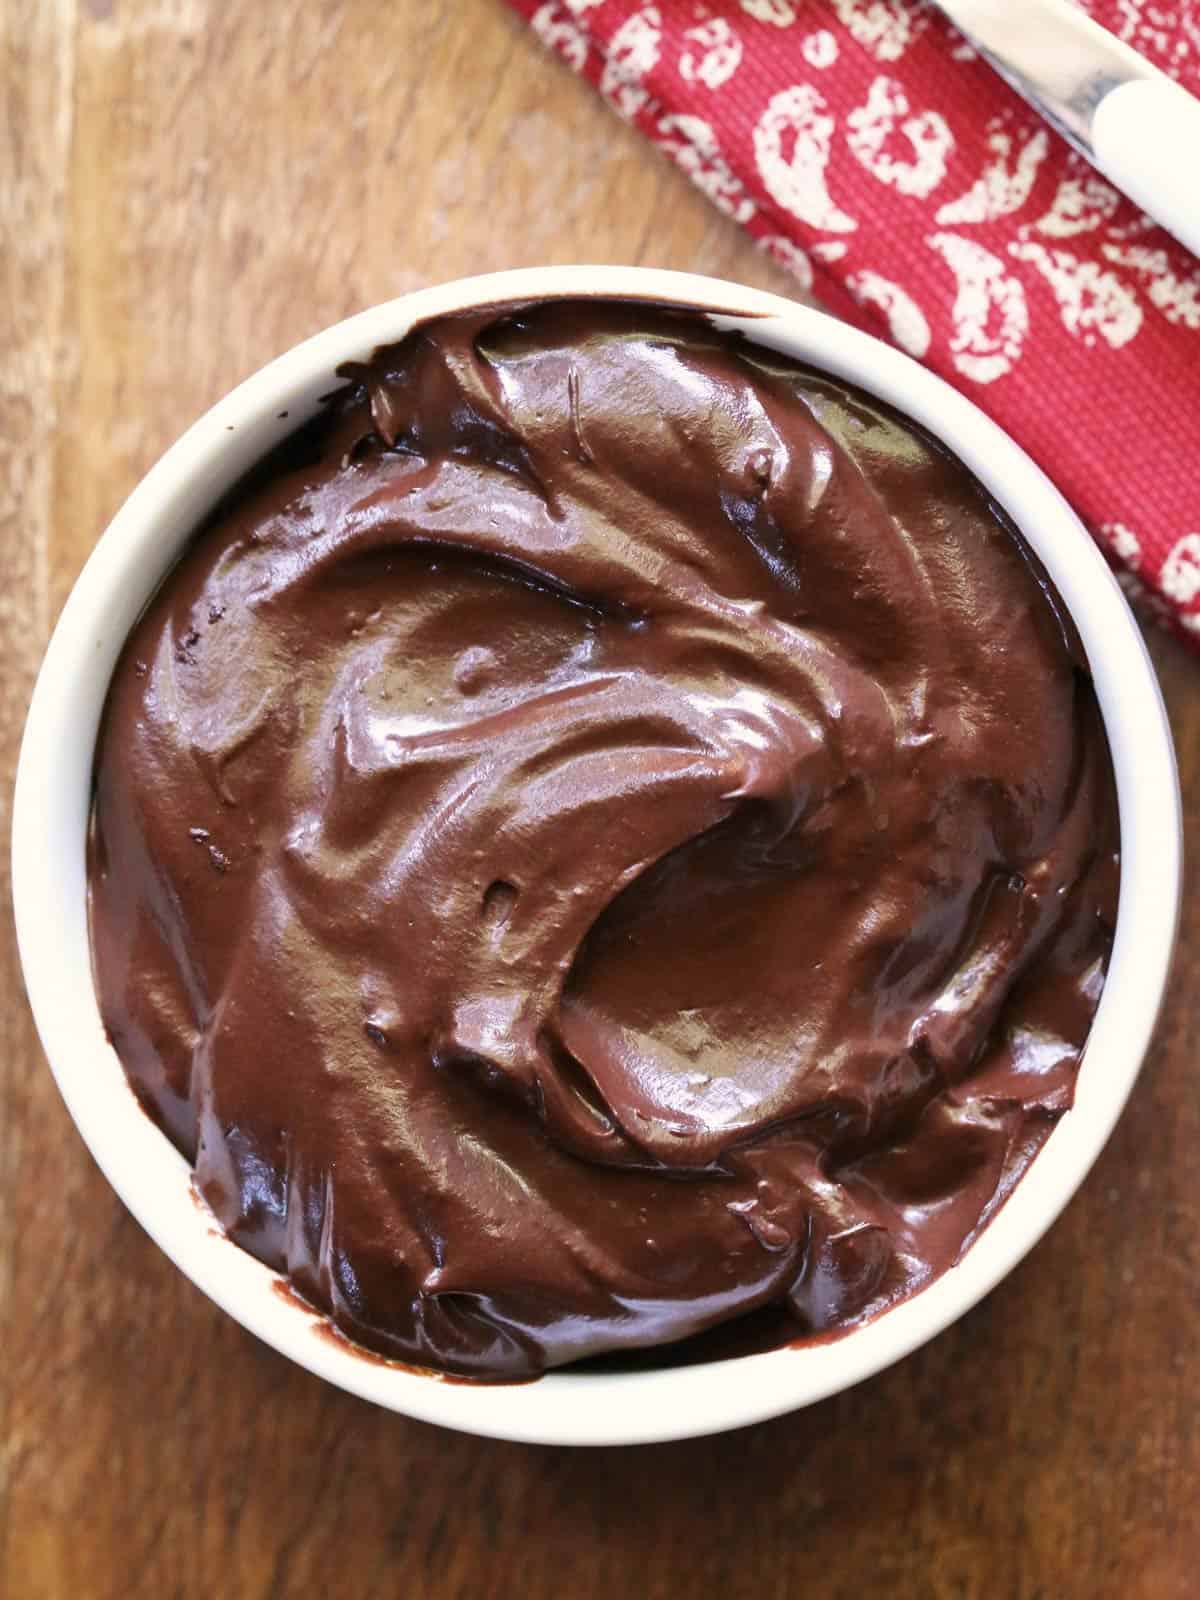 Avocado chocolate mousse is served in a white bowl.